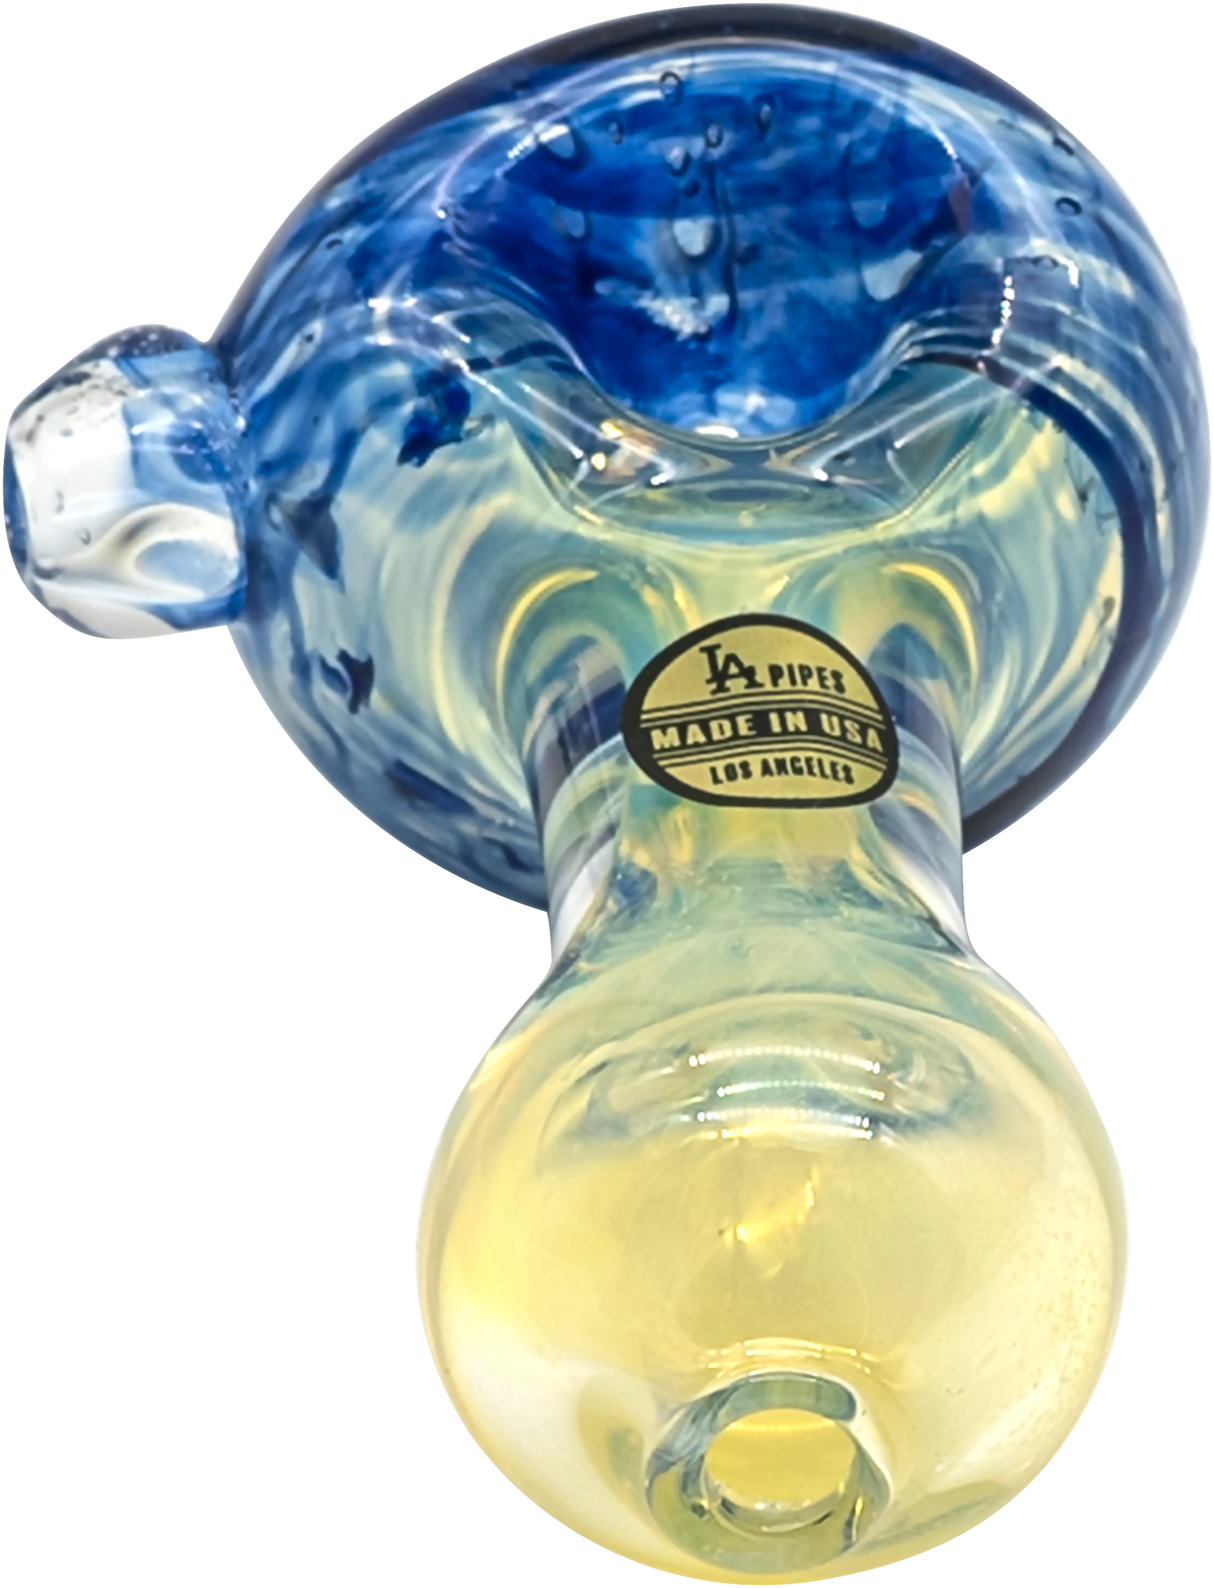 LA Pipes "Thick Neck" Spoon Pipe with Fumed Color Changing Design, Heavy Wall Borosilicate Glass, 3" Length